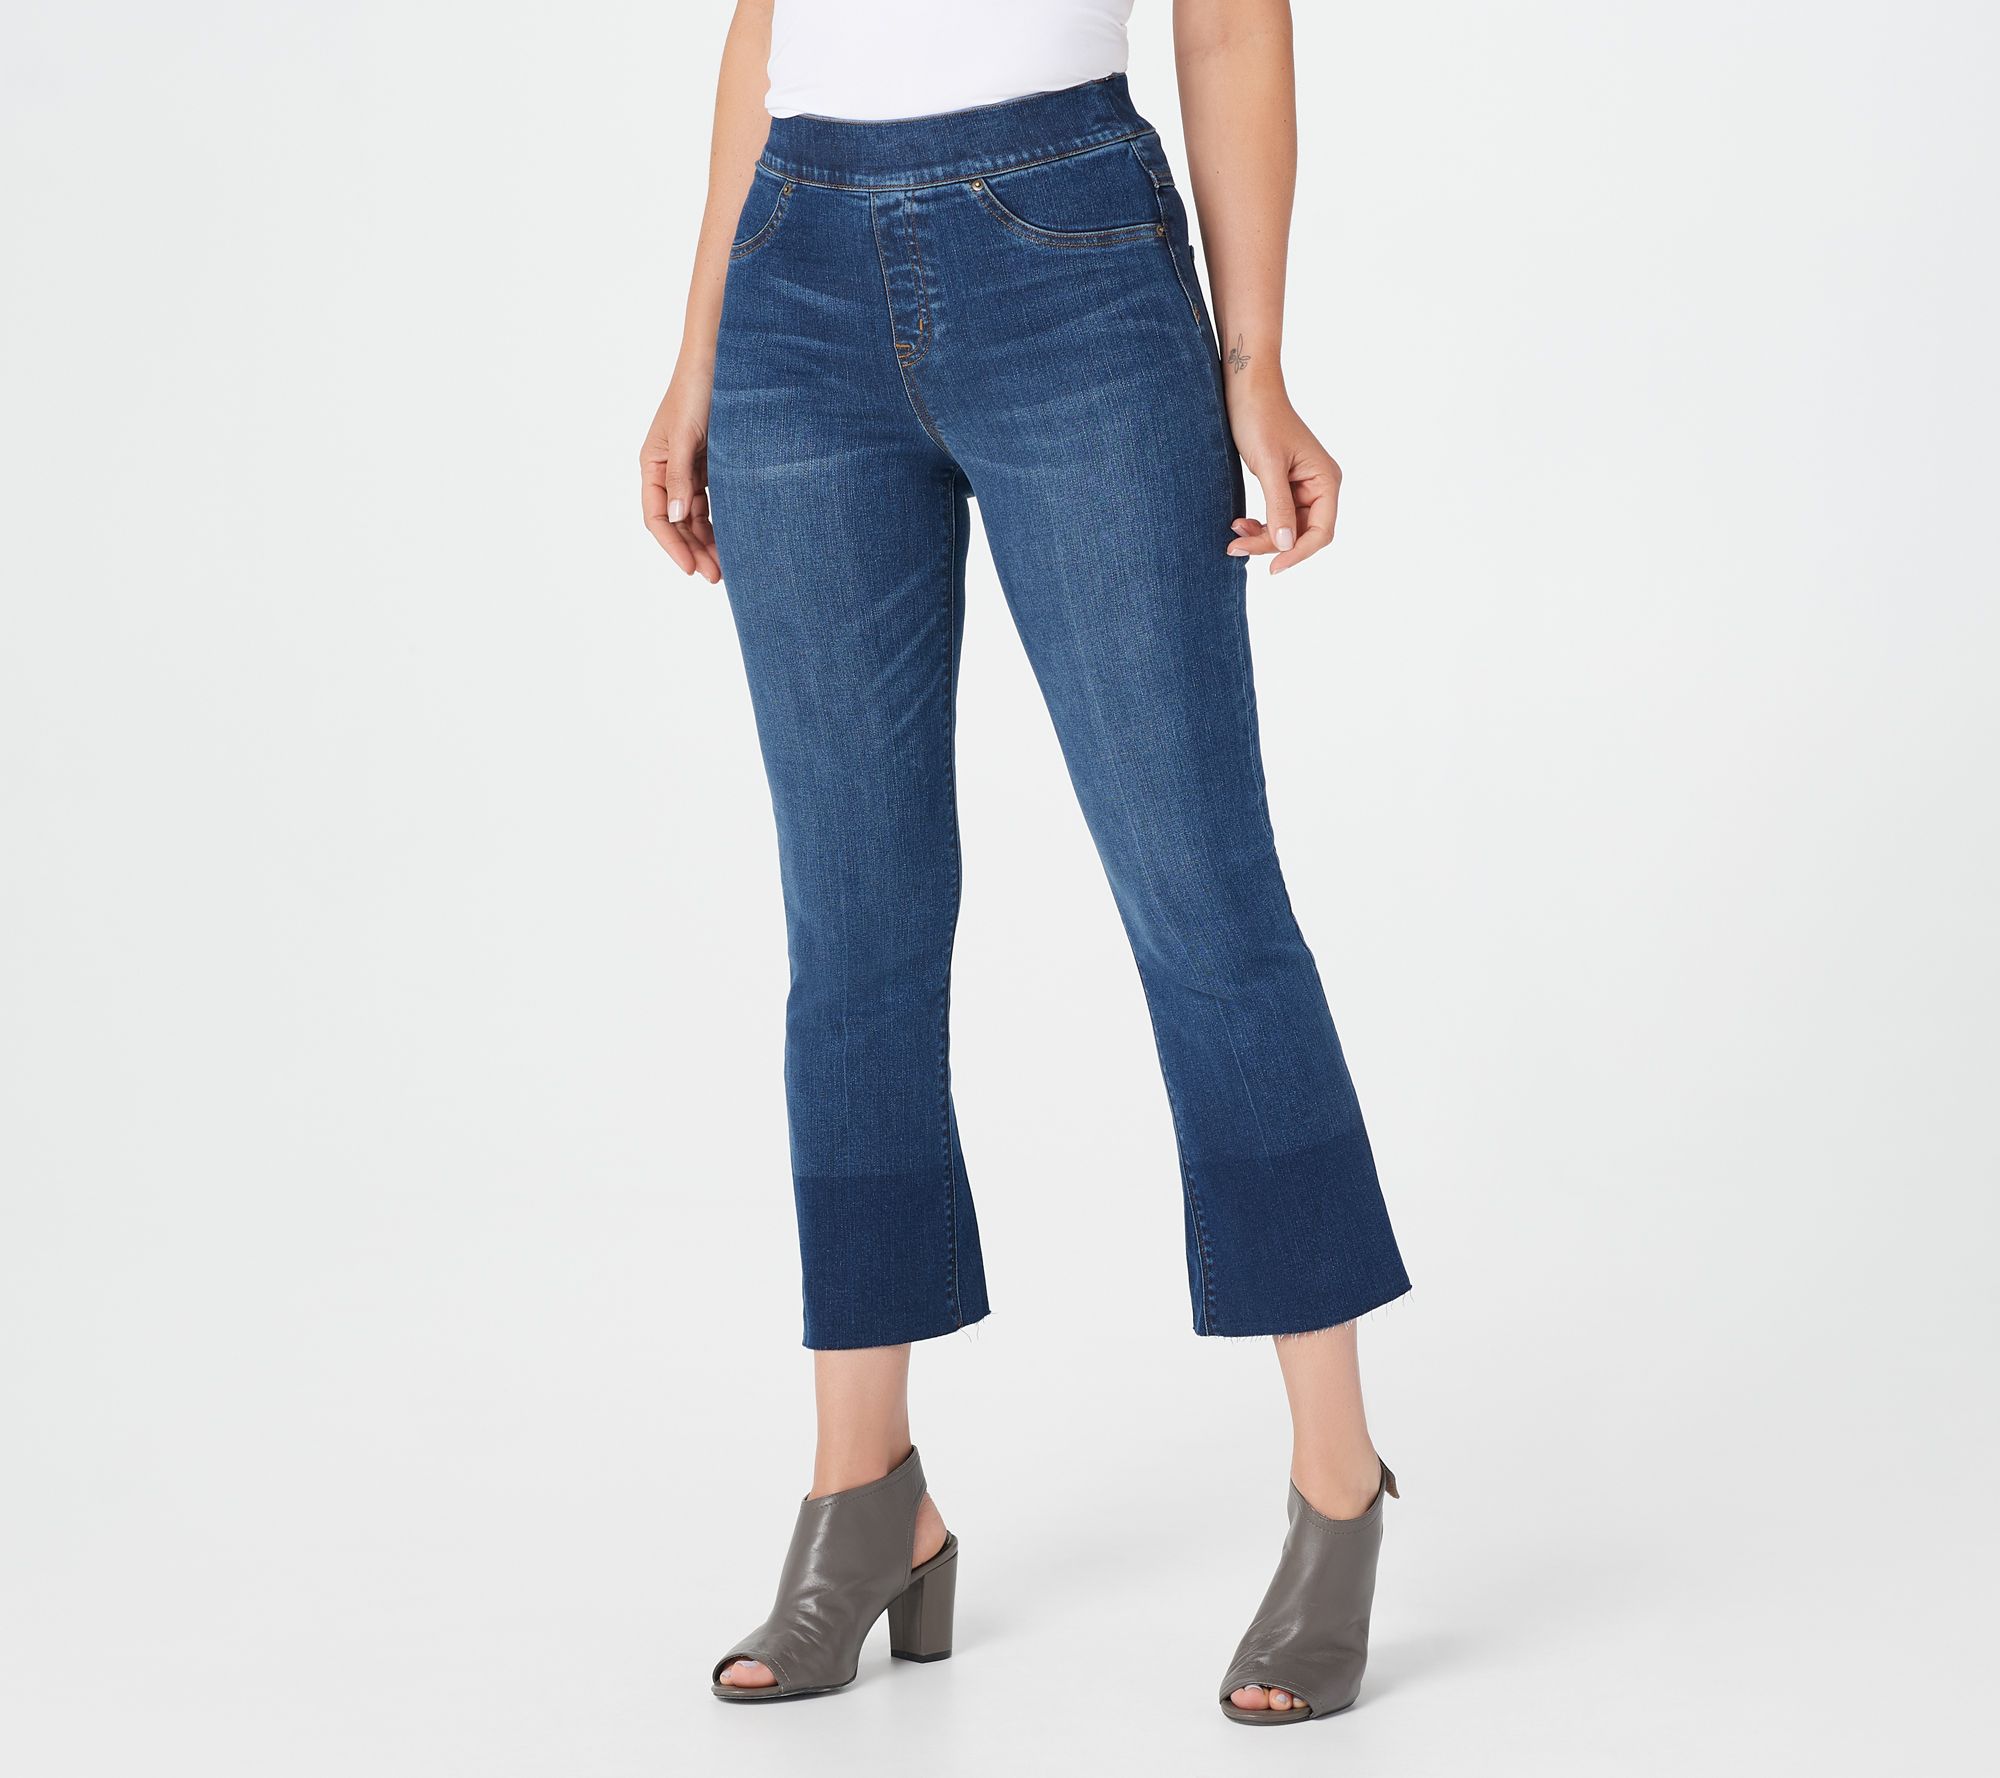 SPANX - The long weekend is calling and this Distressed Ankle